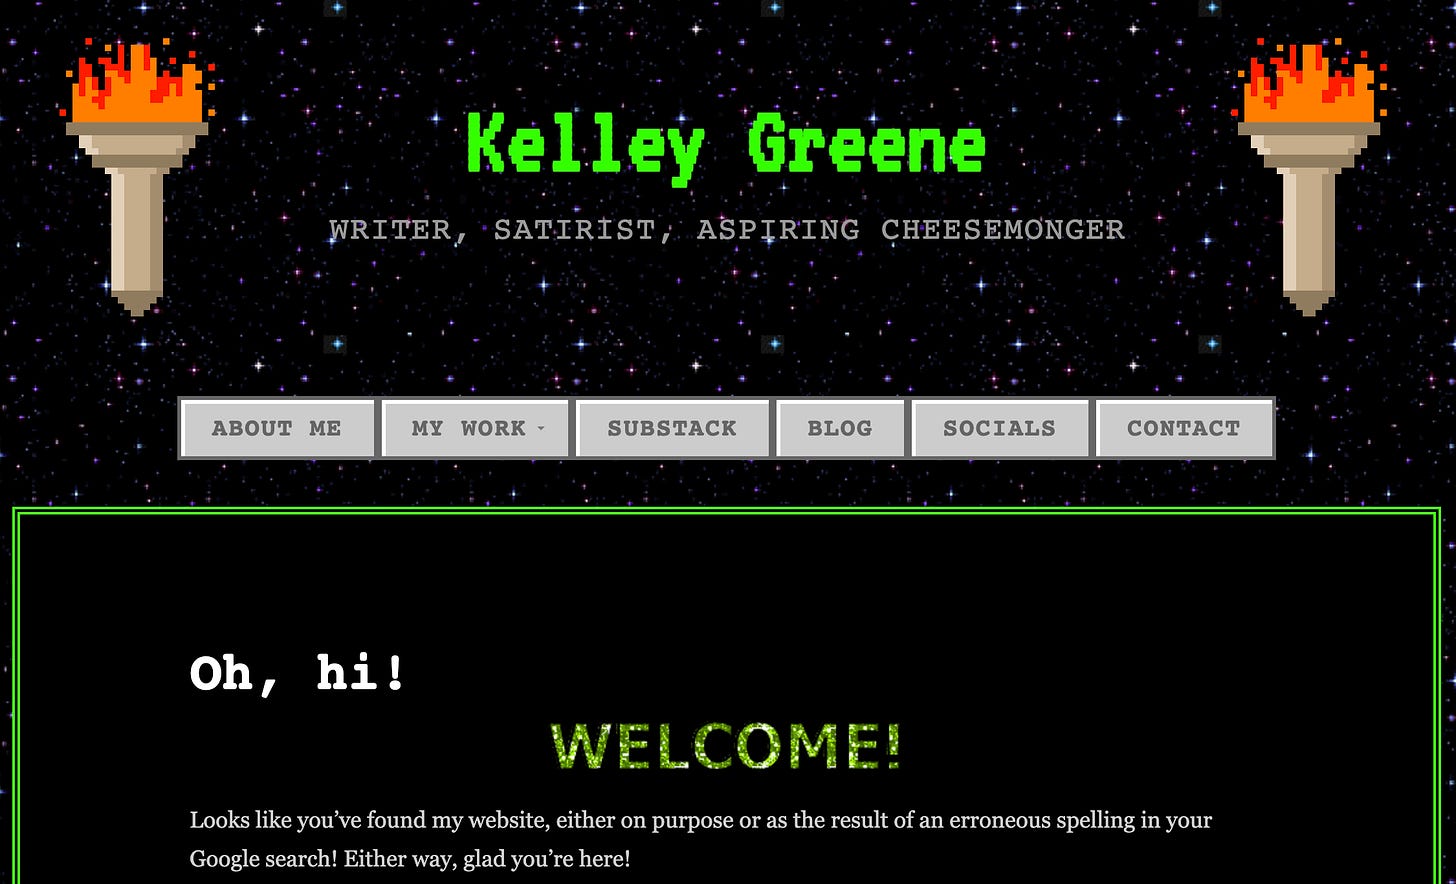 My website's homepage -- flickering star background, neon green lettering, horrible blingee style gifs -- we've got it all, baby.